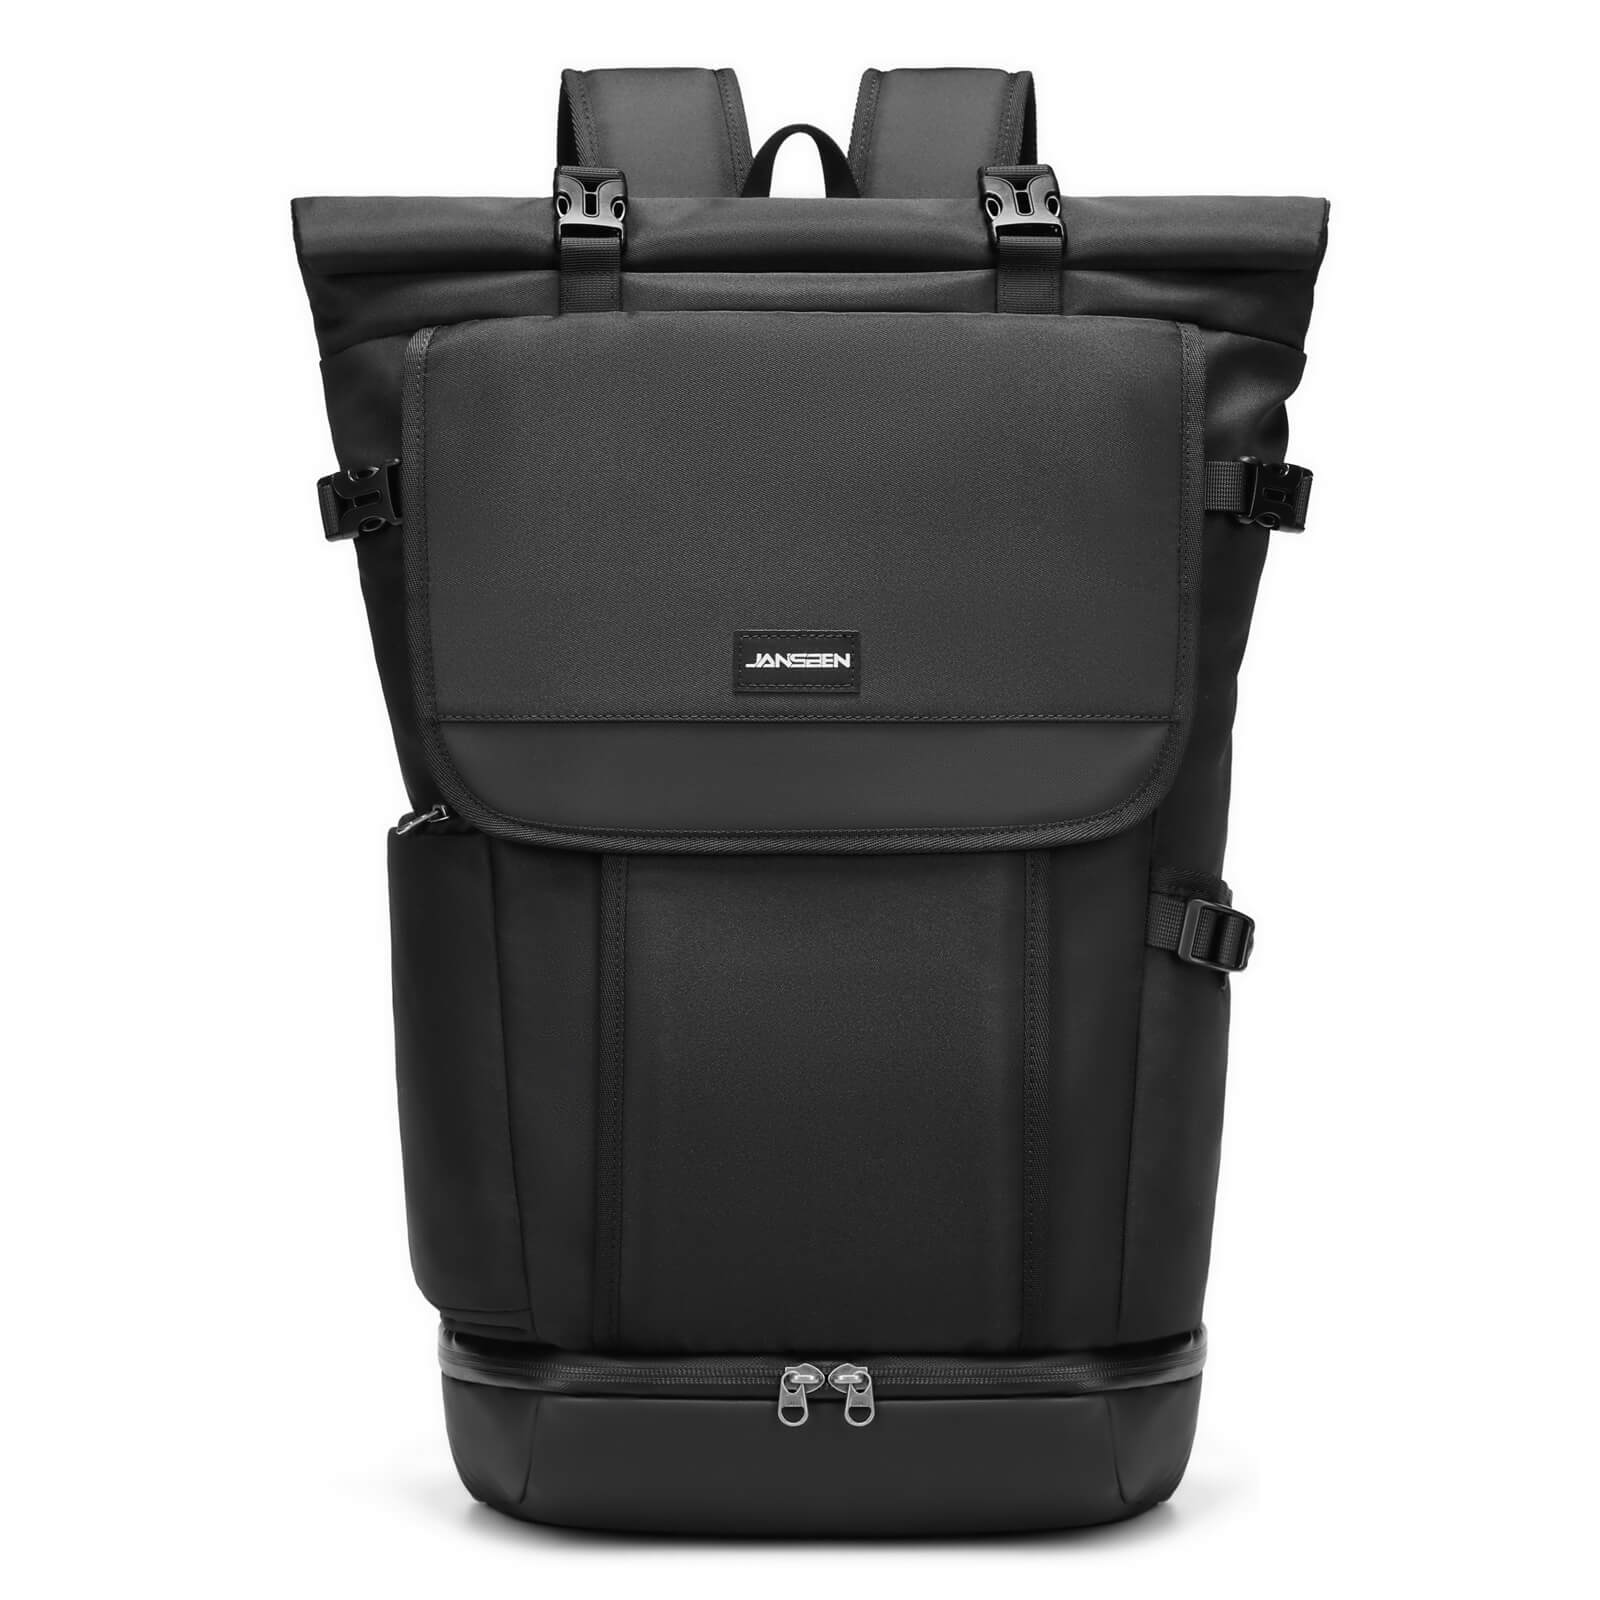 rolltop-backpack-shoes-compartment-Jansben-E058-main